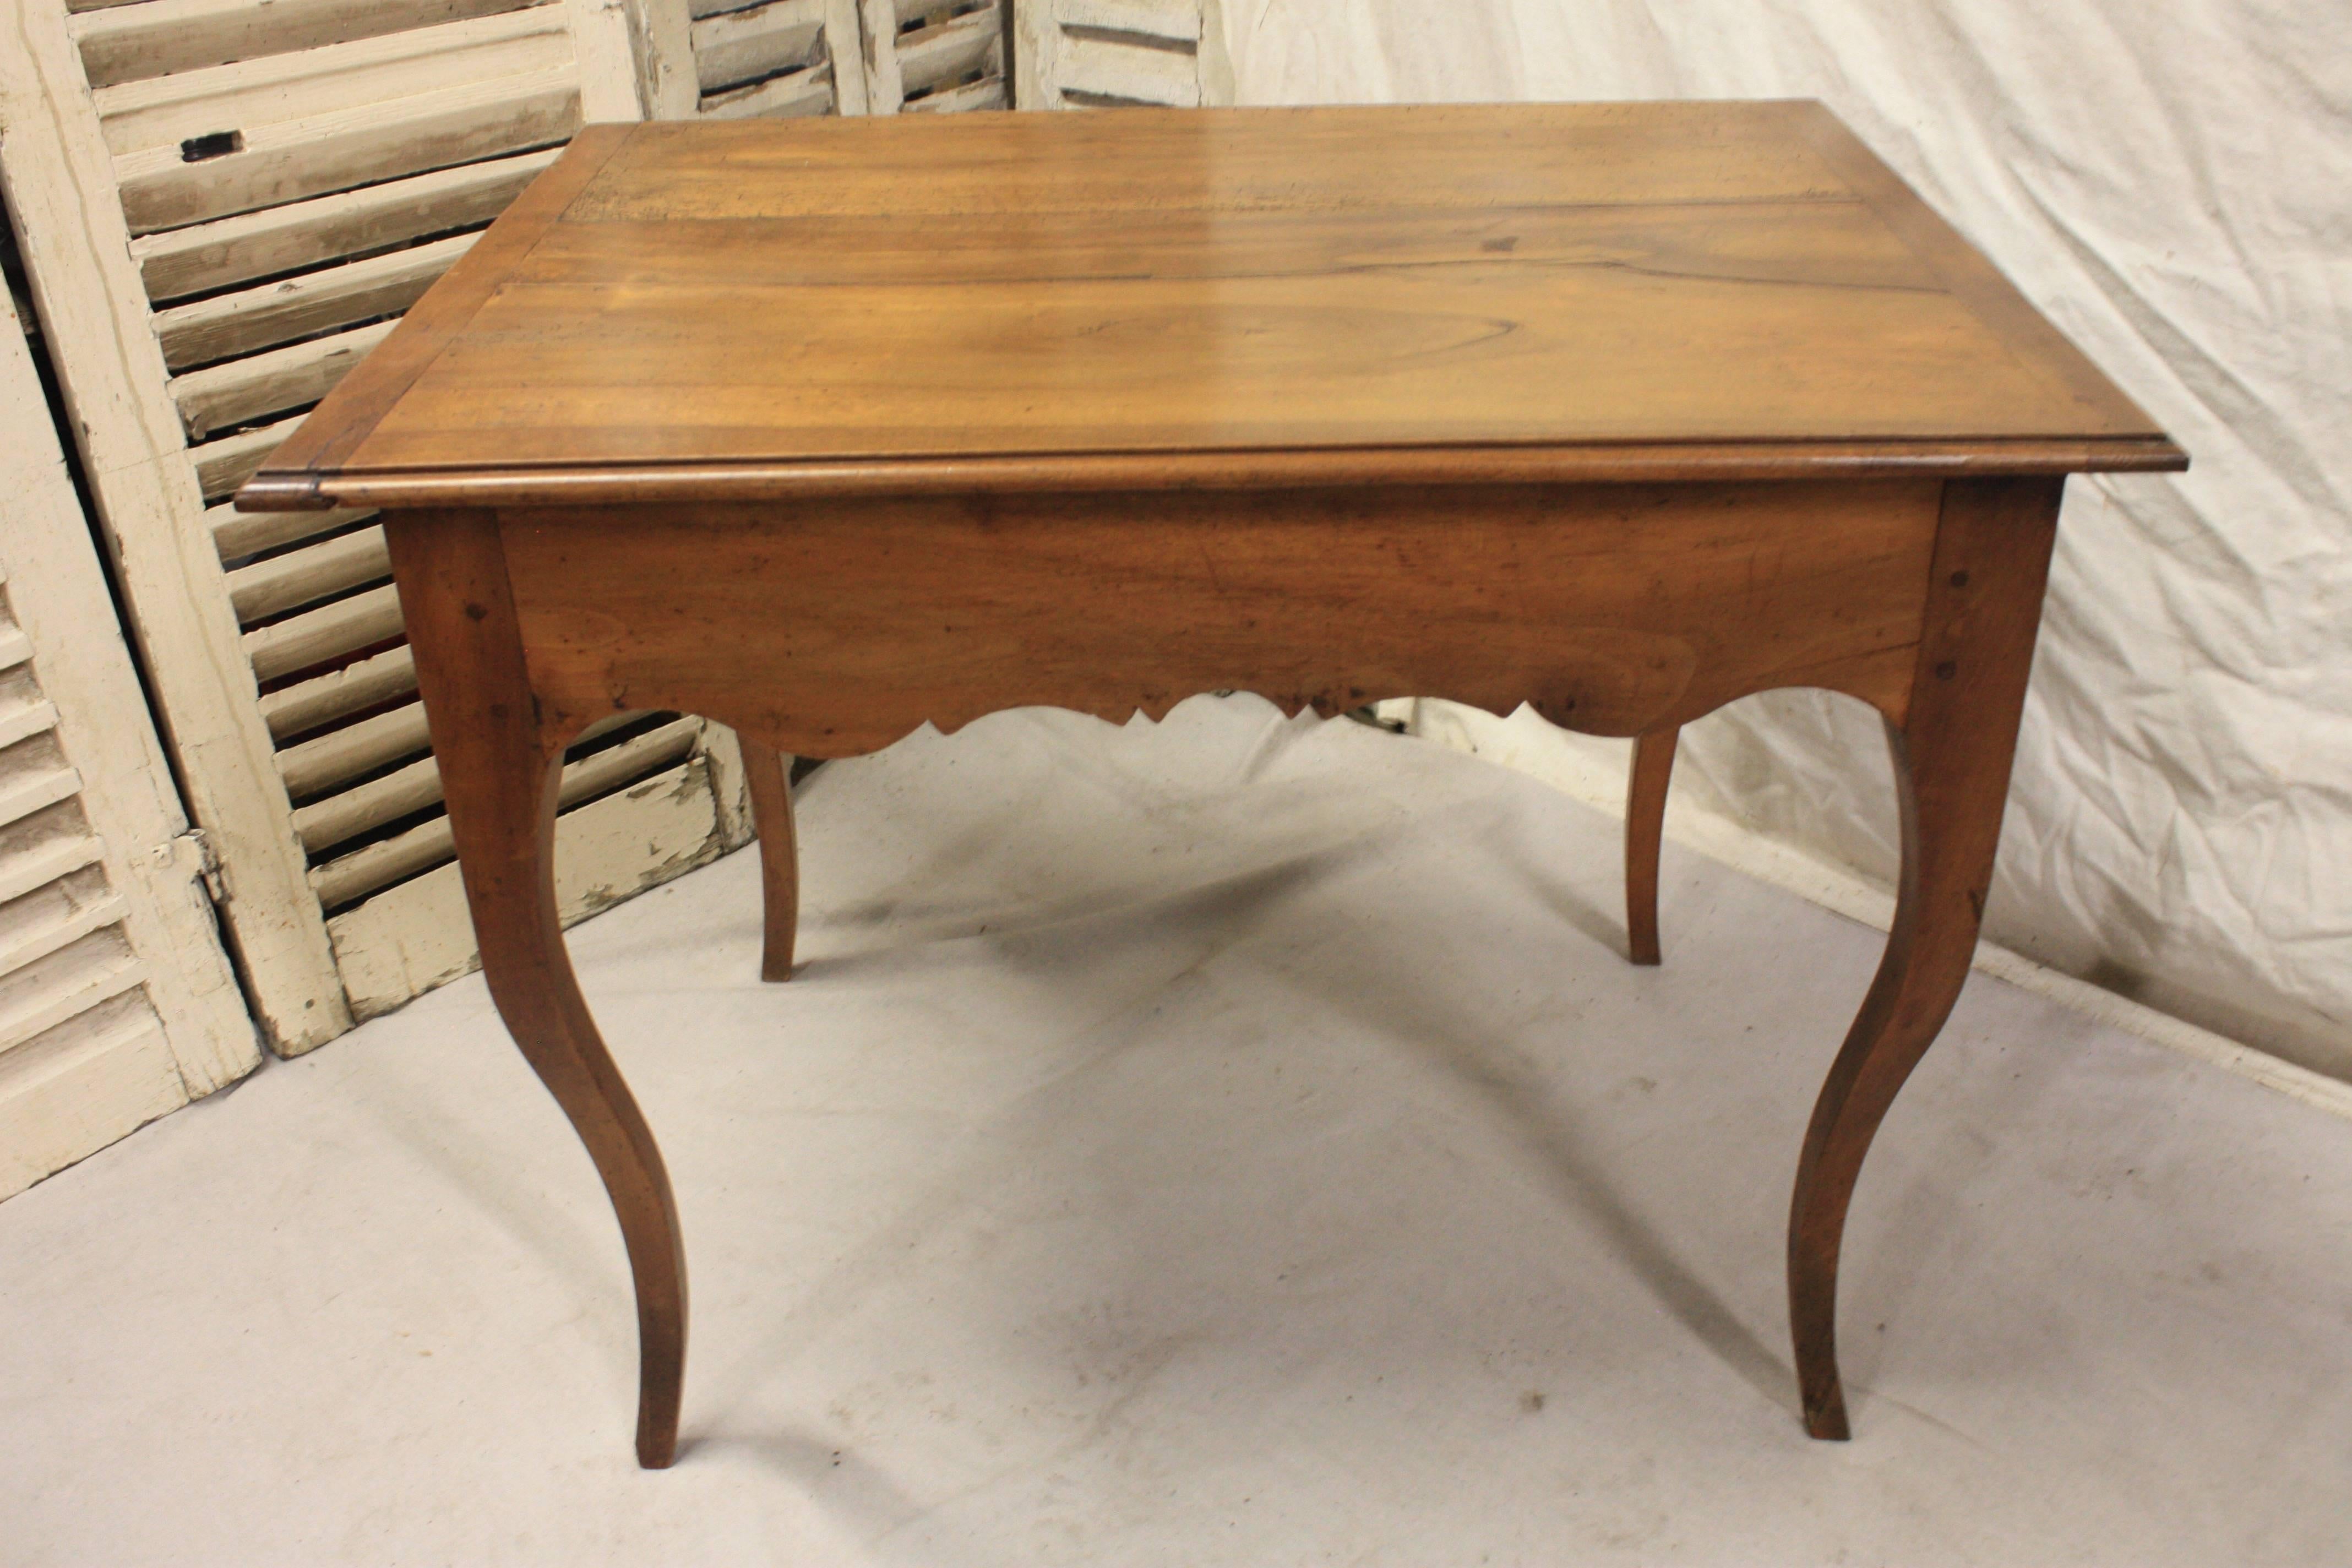 French Provincial Charming 19th Century Provencal Table